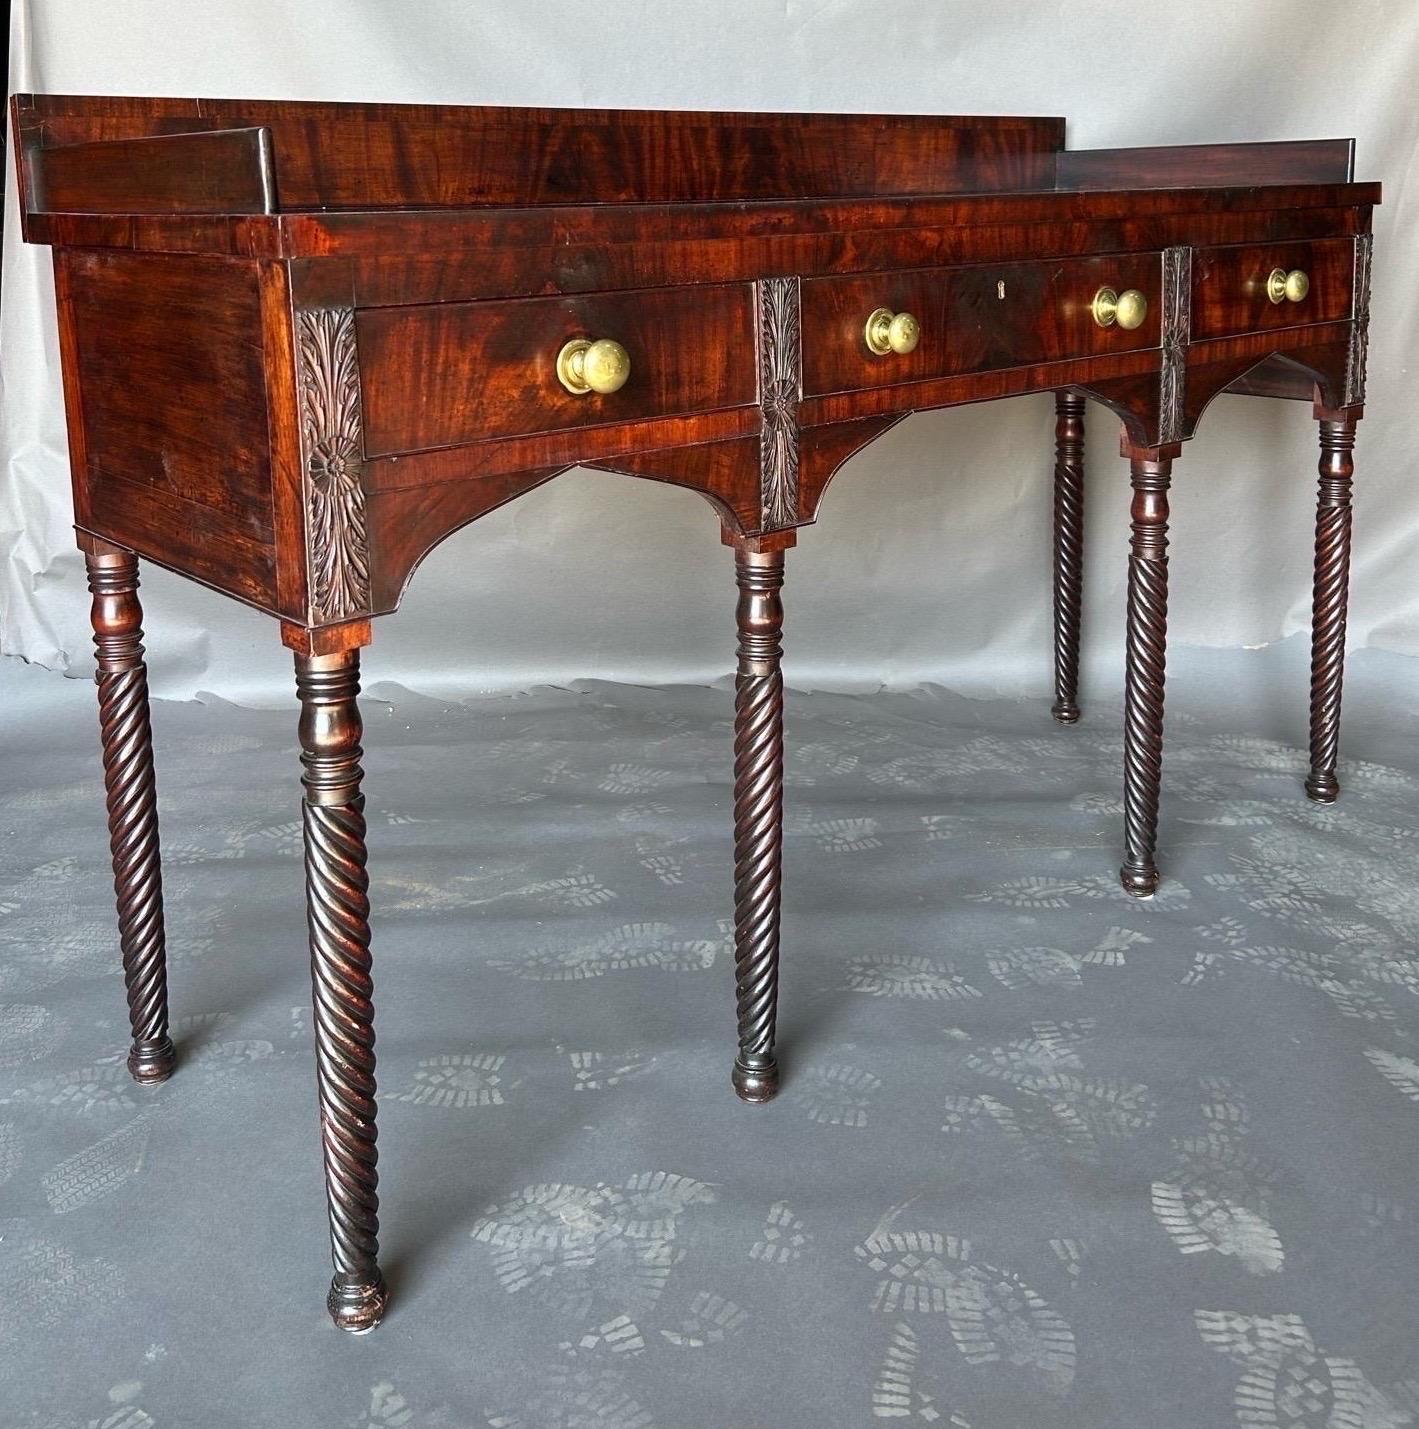 Fine early 19th century American Federal period mahogany sideboard from Norfolk, Virginia. The sideboard features 
carved leaf and rosette motifs over spiral turned legs and button feet. It’s a very fine example of the period. 